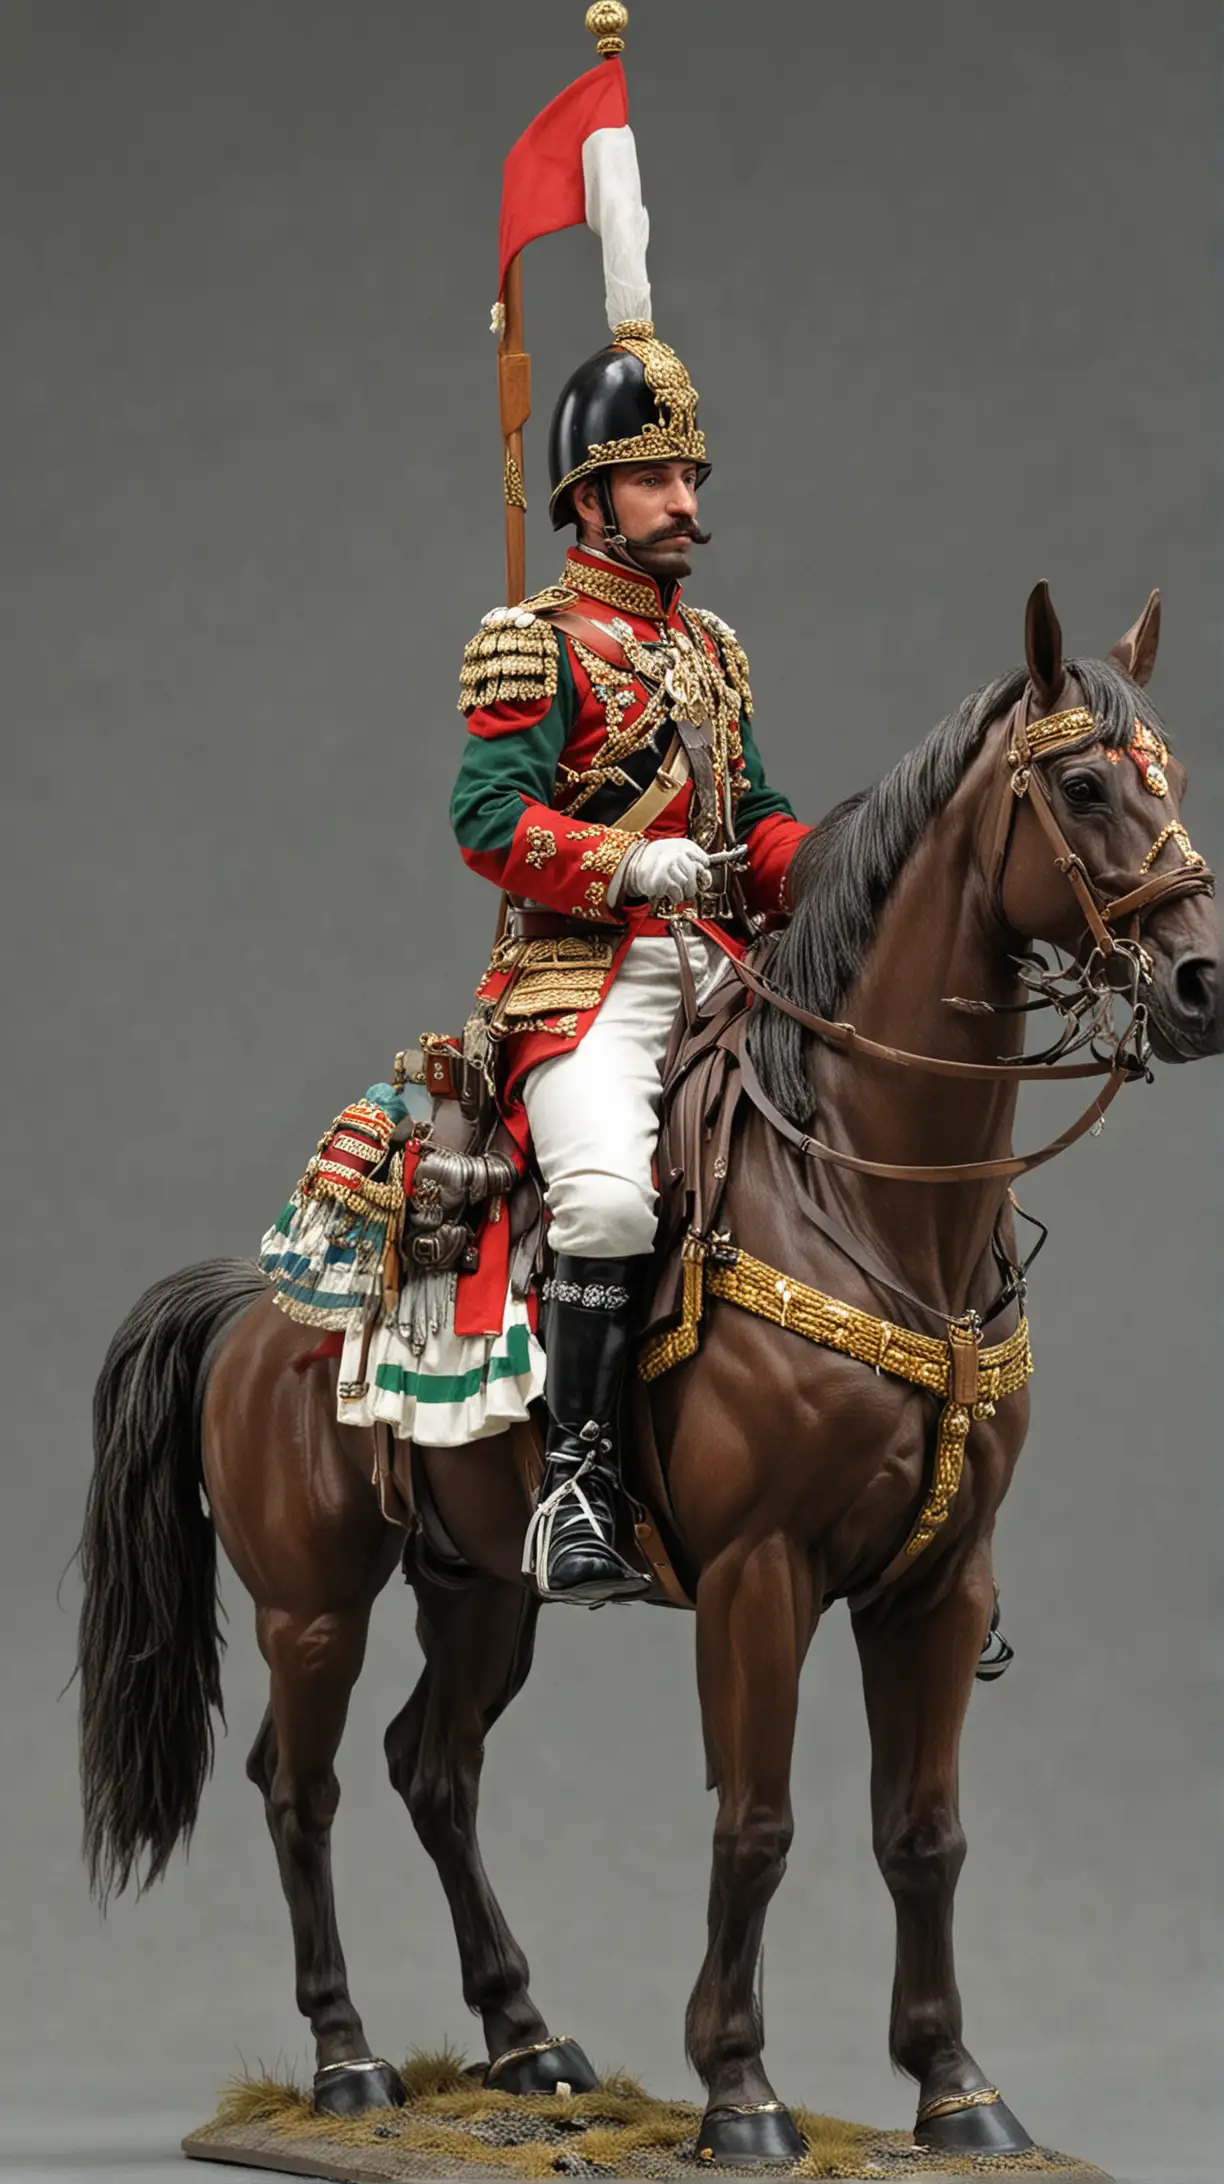 Hungarian Hussar from the 1600s in Regal Attire